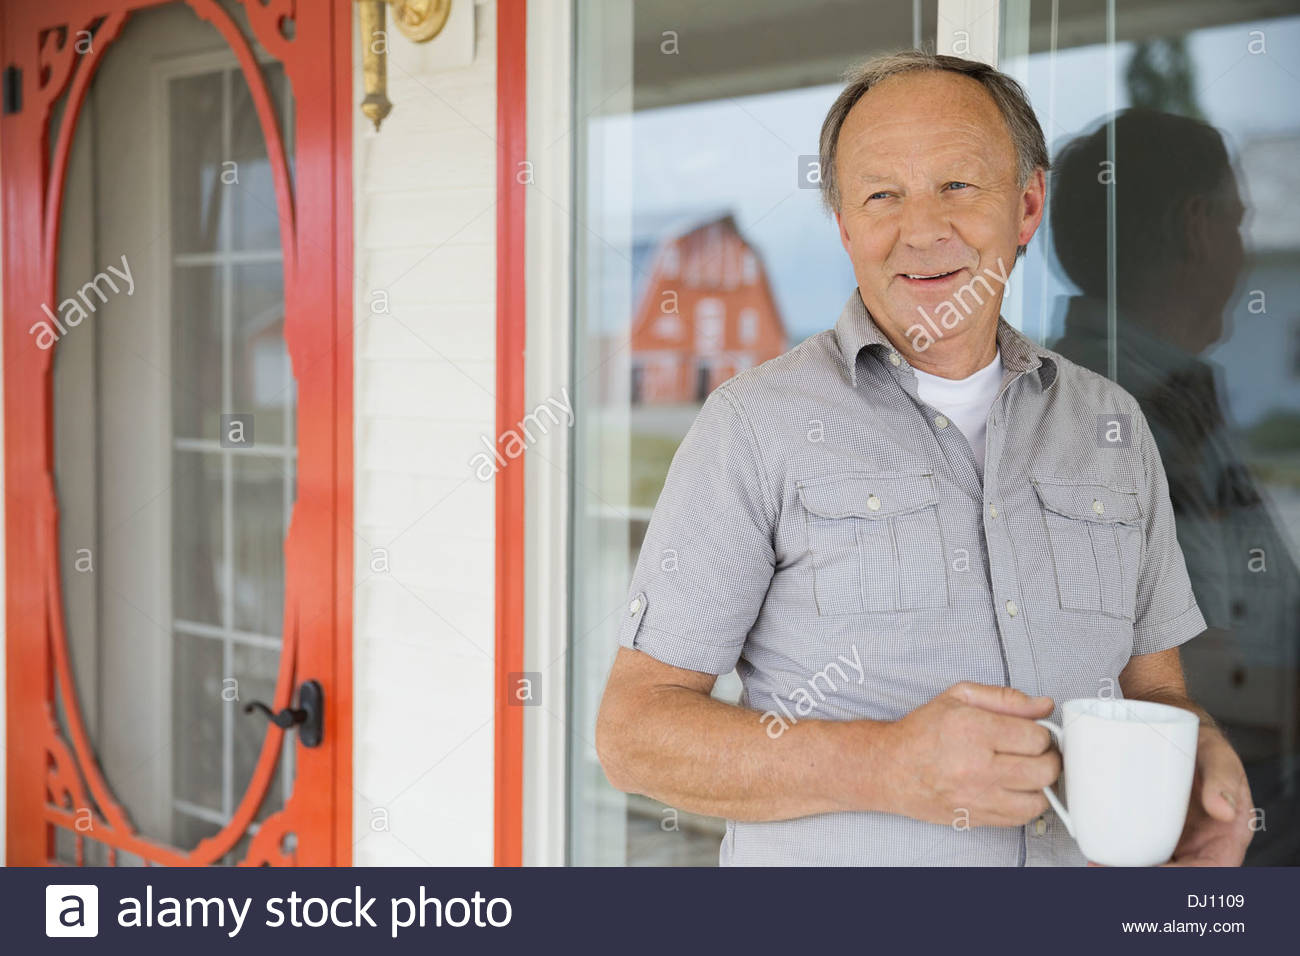 Man on porch with coffee mug Banque D'Images